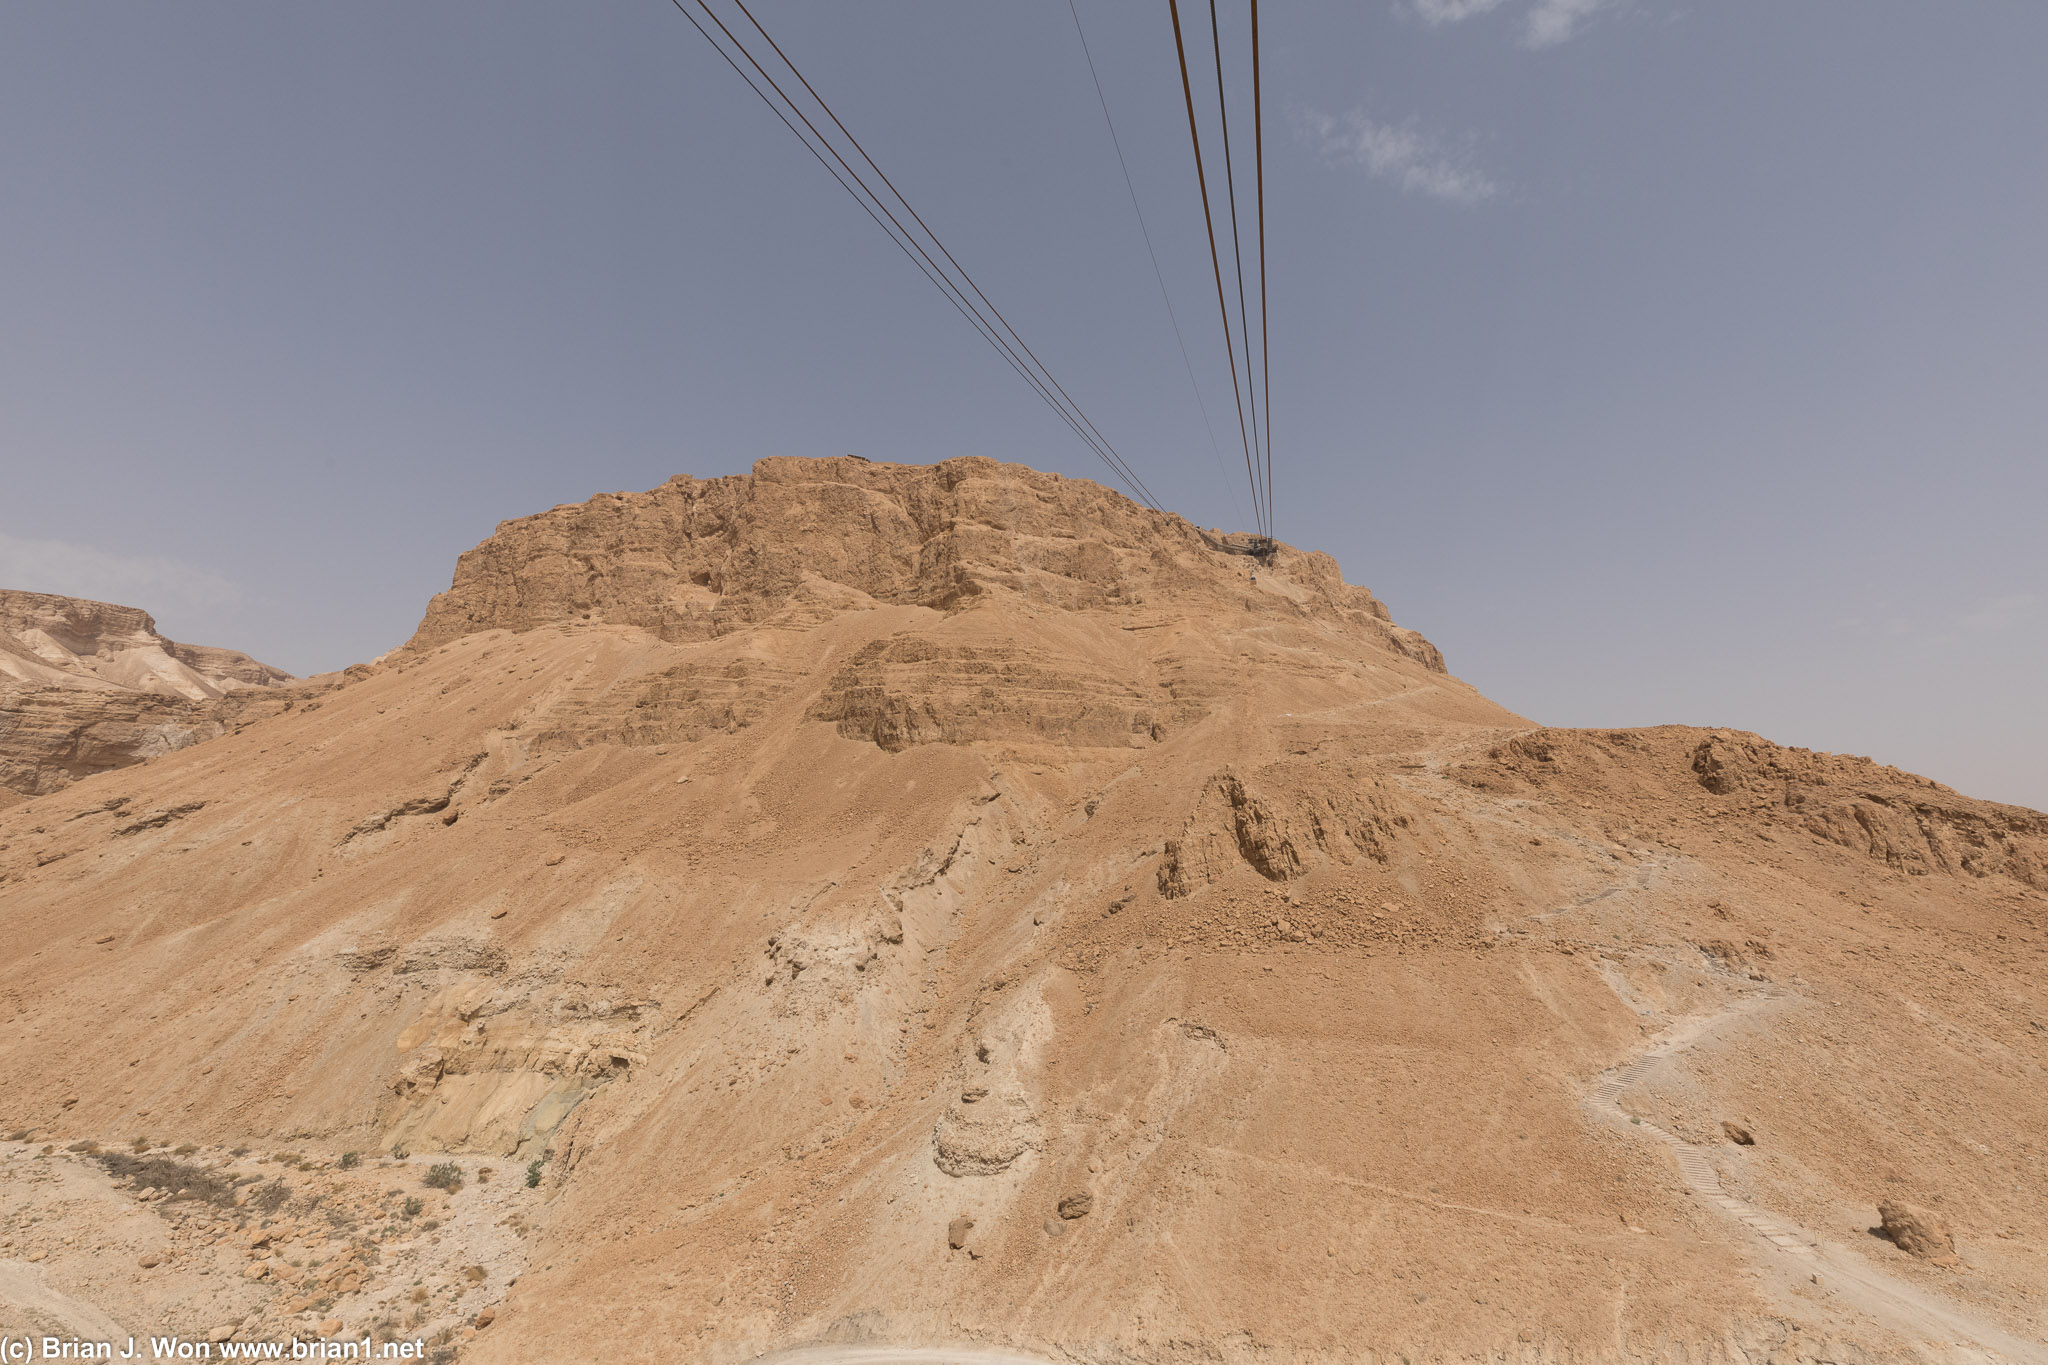 Cable car up to the Fortress of Masada.